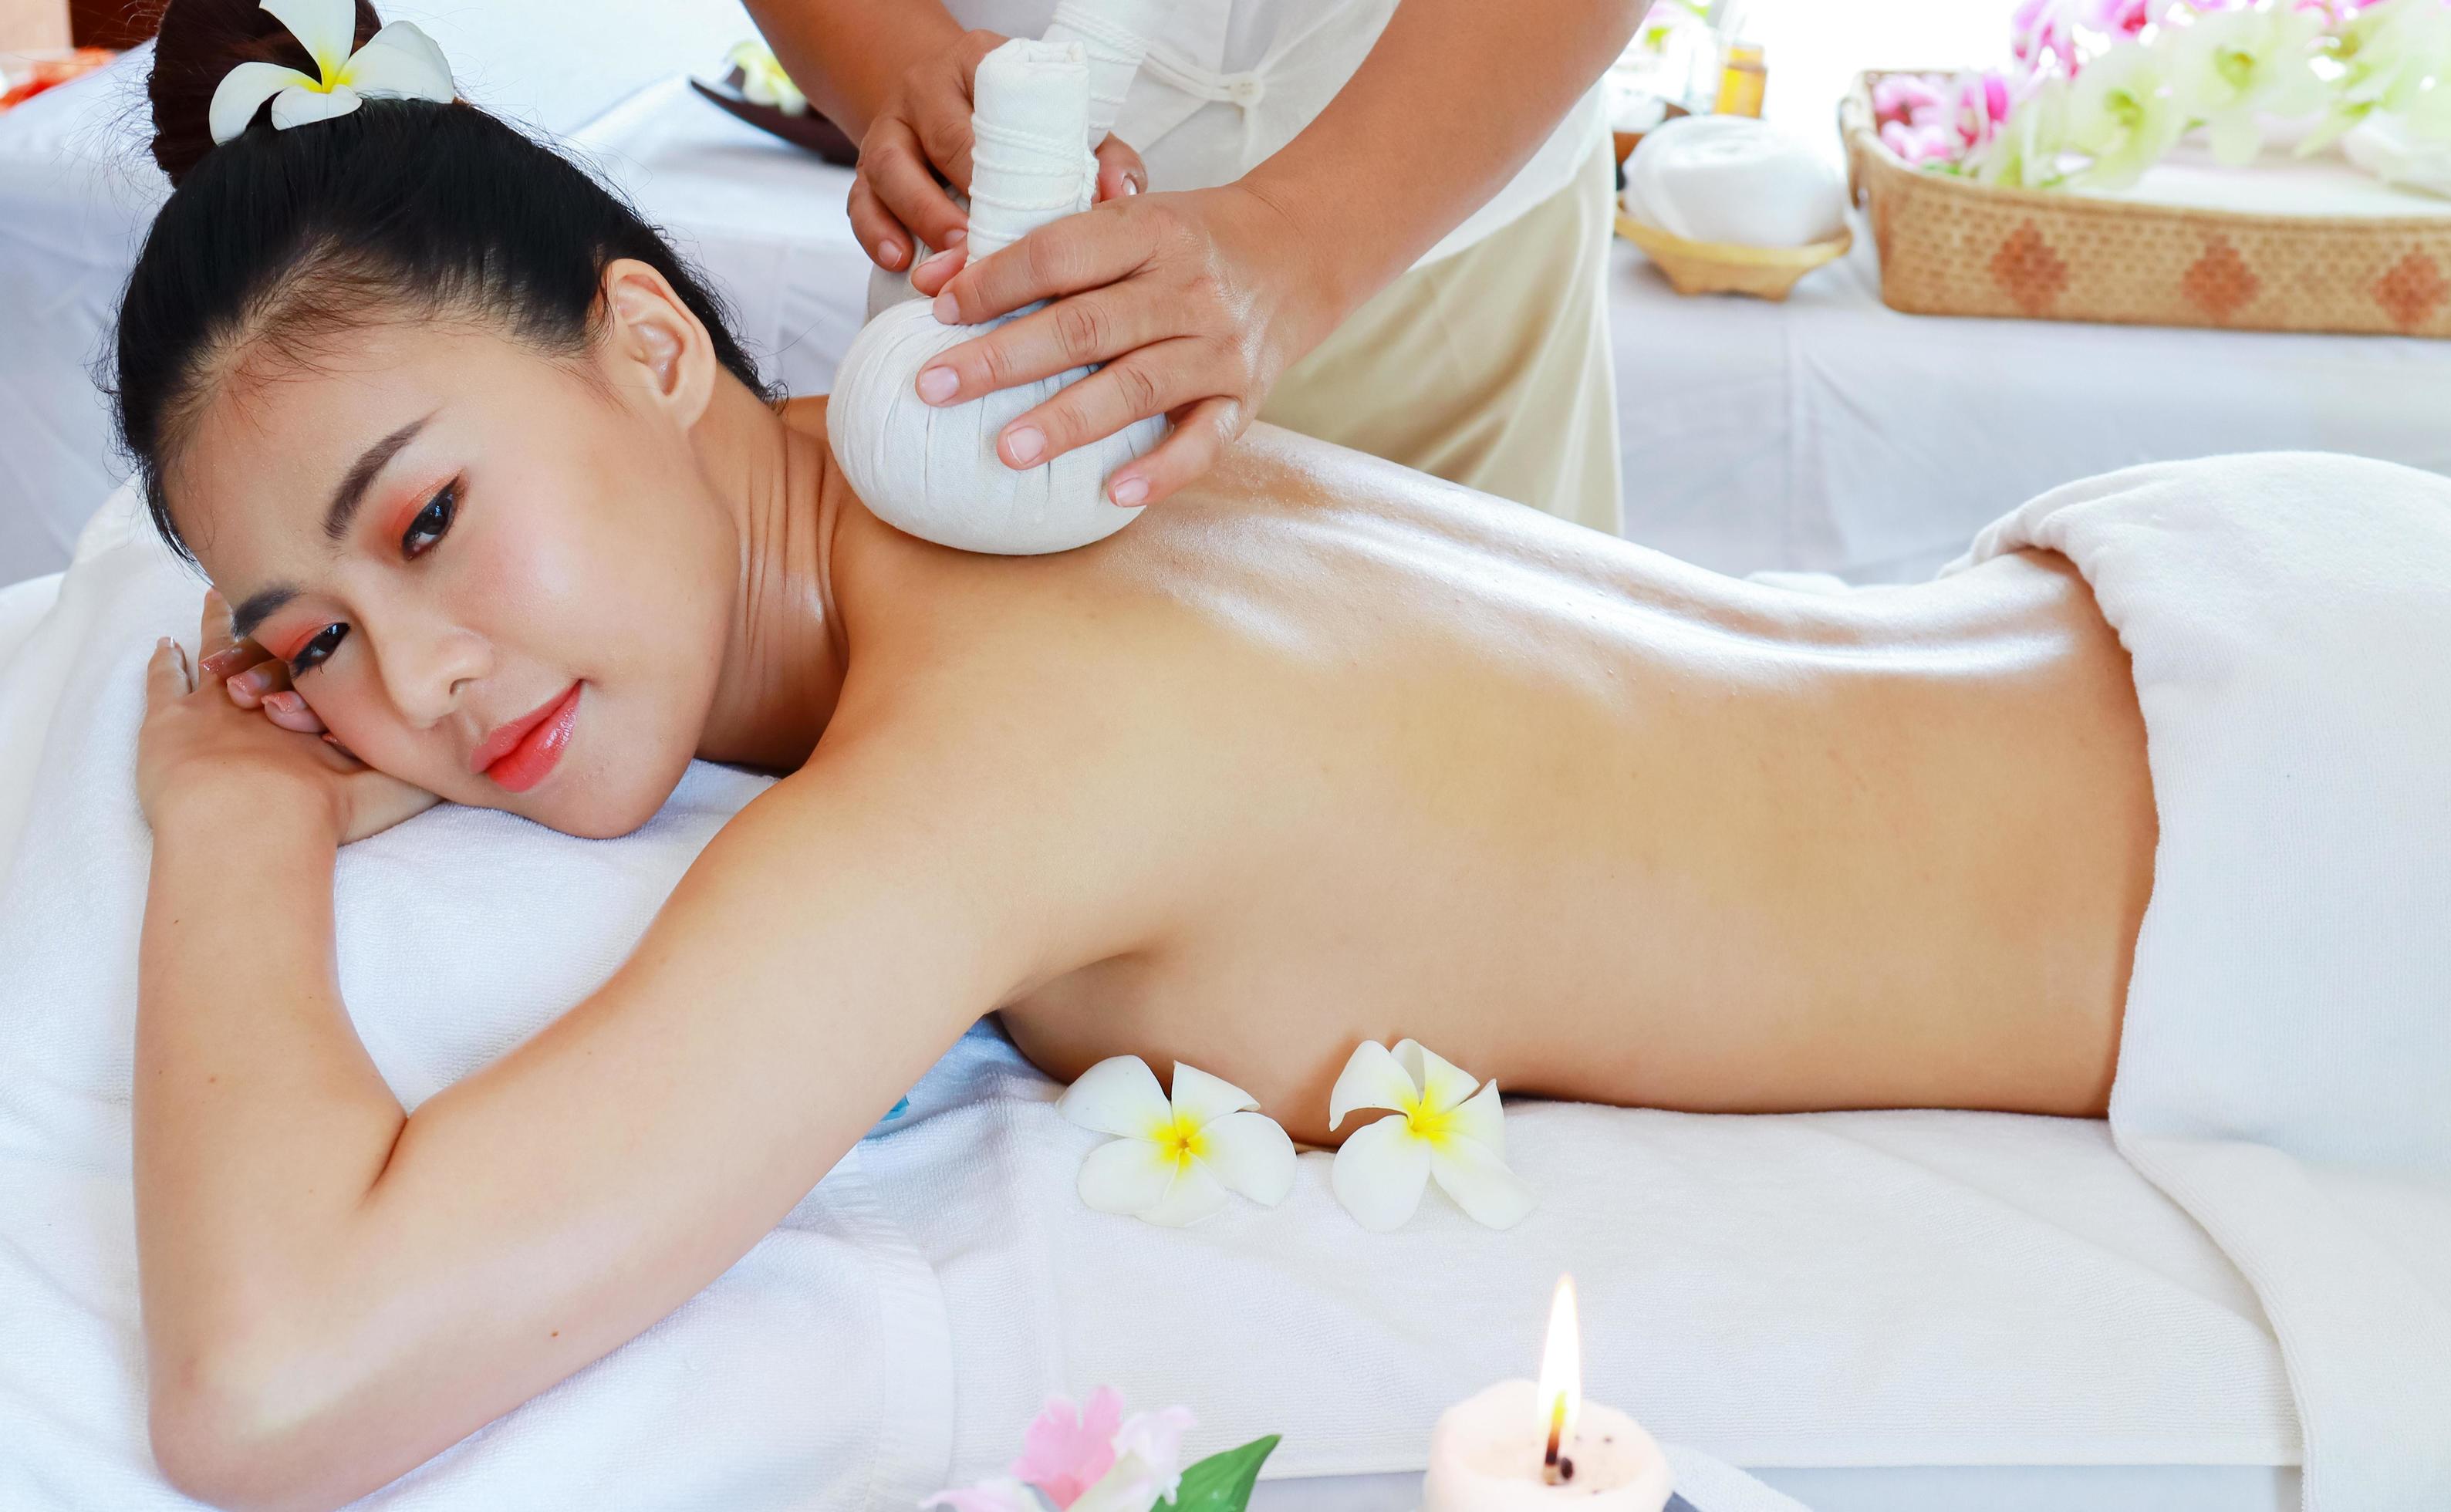 christi manalo share relax asian massage therapy photos